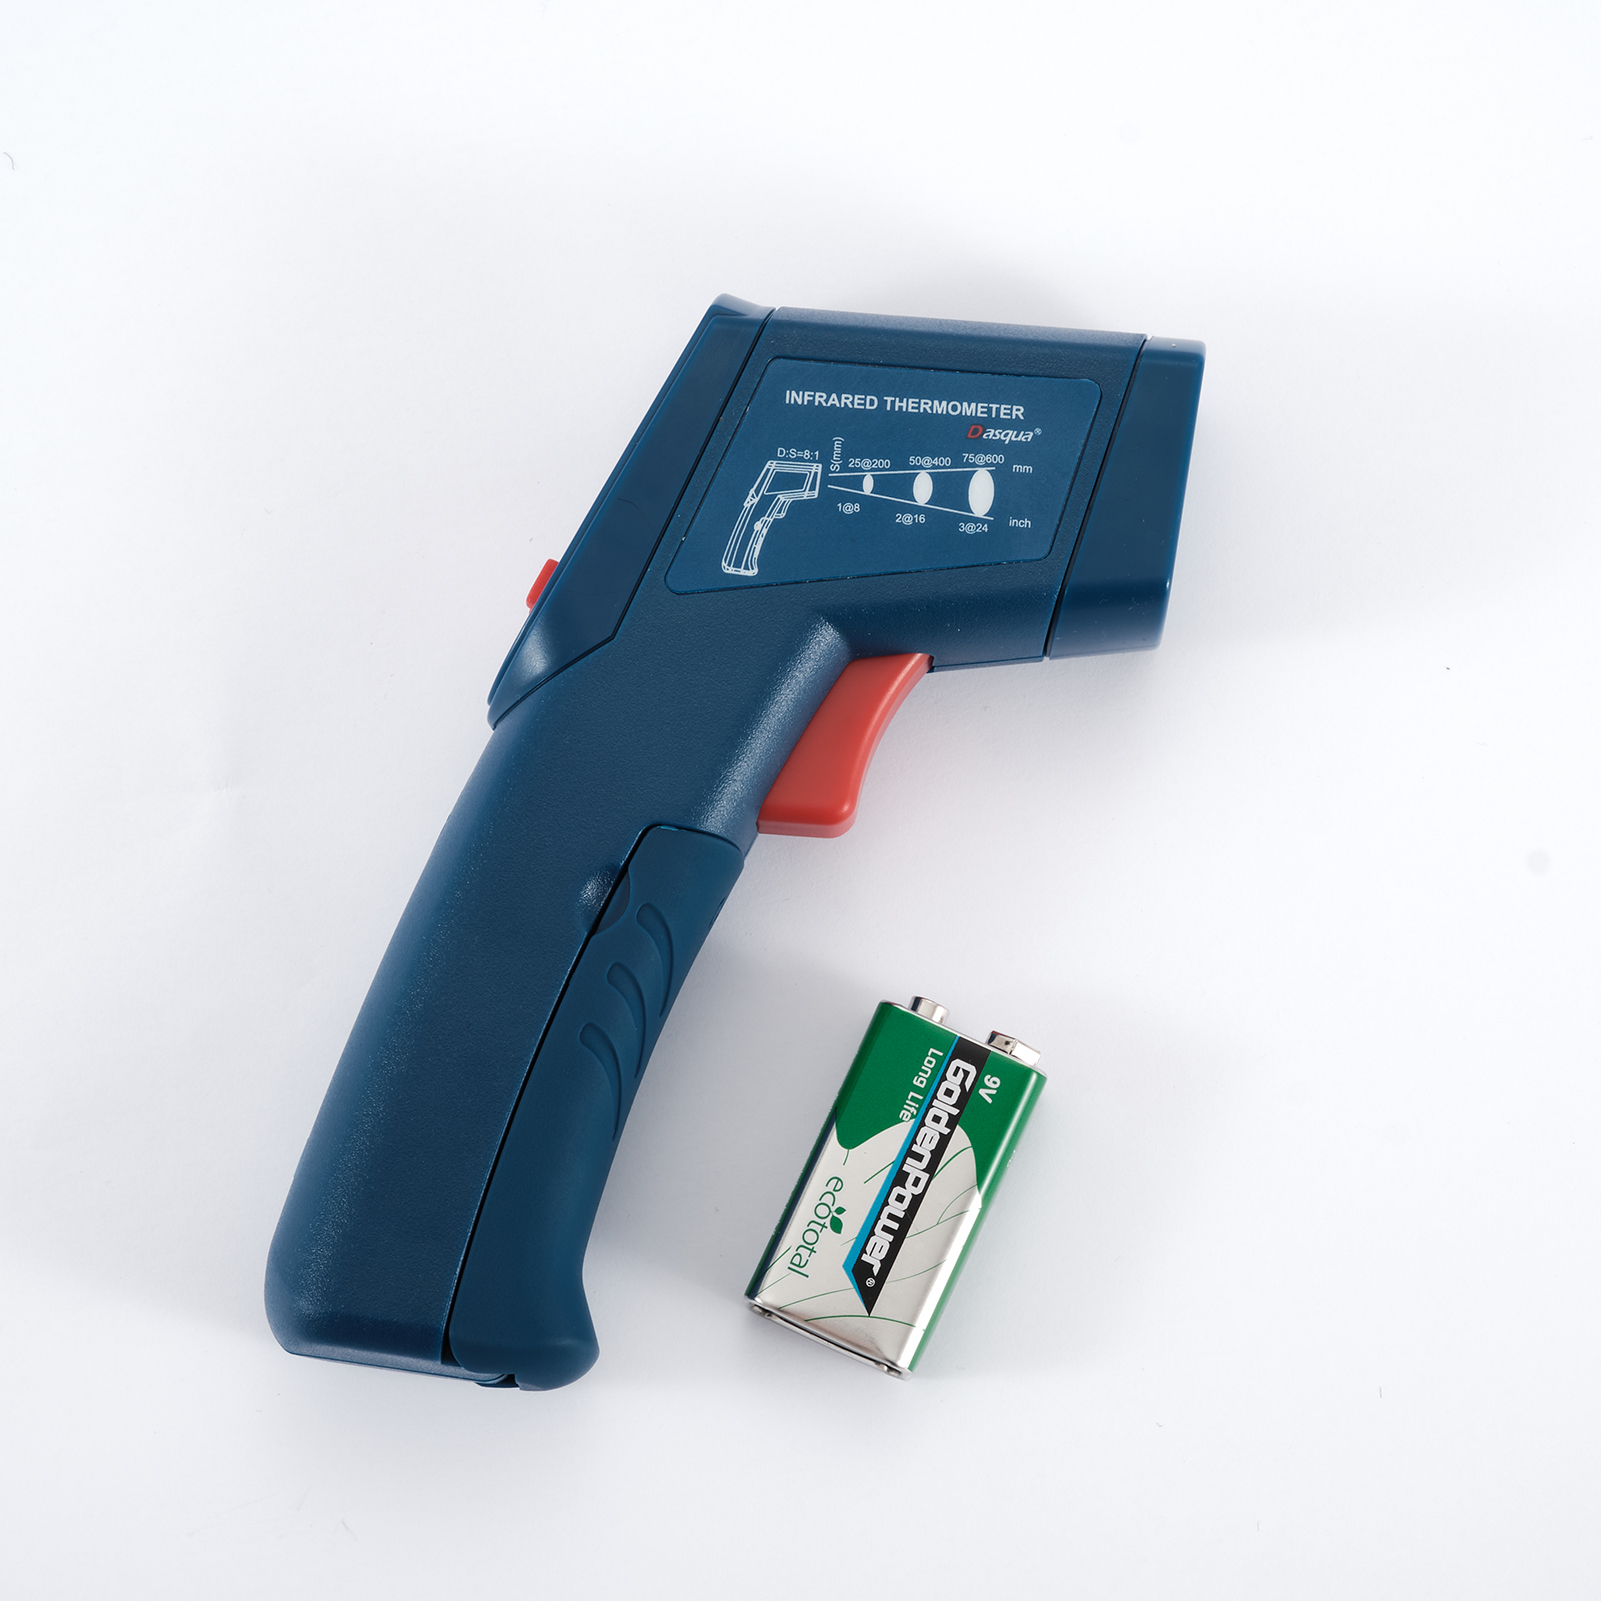 DASQUA High Accuracy -20℃～320(℃-4℉～608)℉ Digital Infrared Thermometer  Non-Contact Digital Temperature Gun IR Thermometer for Industrial, Kitchen  Cooking, Ovens Manufacture and Factory